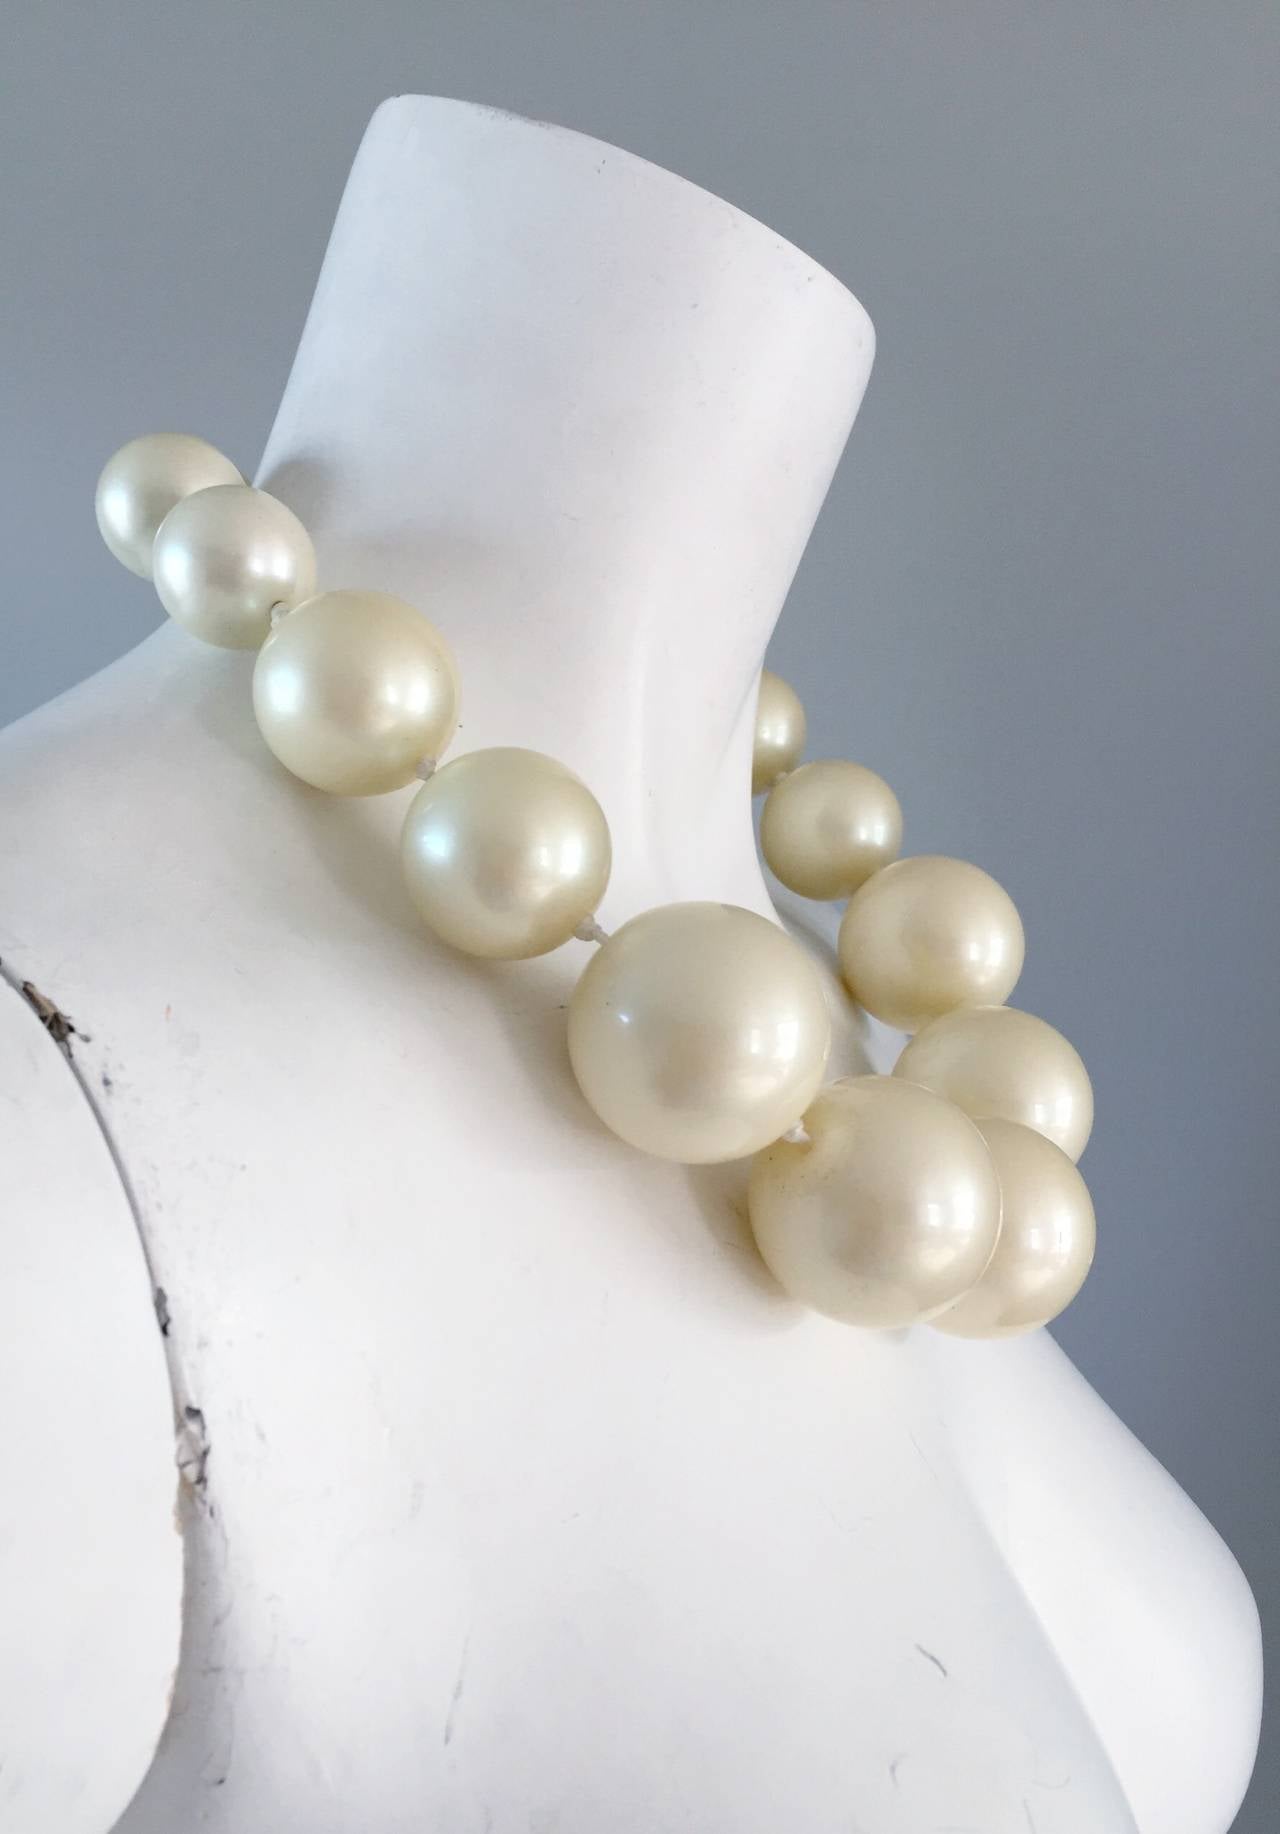 Chic 1960s oversized pearl necklace! Substantial quality, with a silver clasp closure. Great with a dress, yet perfect with jeans. Adds just the right amount of 'umph' to your little black dress! In great condition. Measures 22 inches long